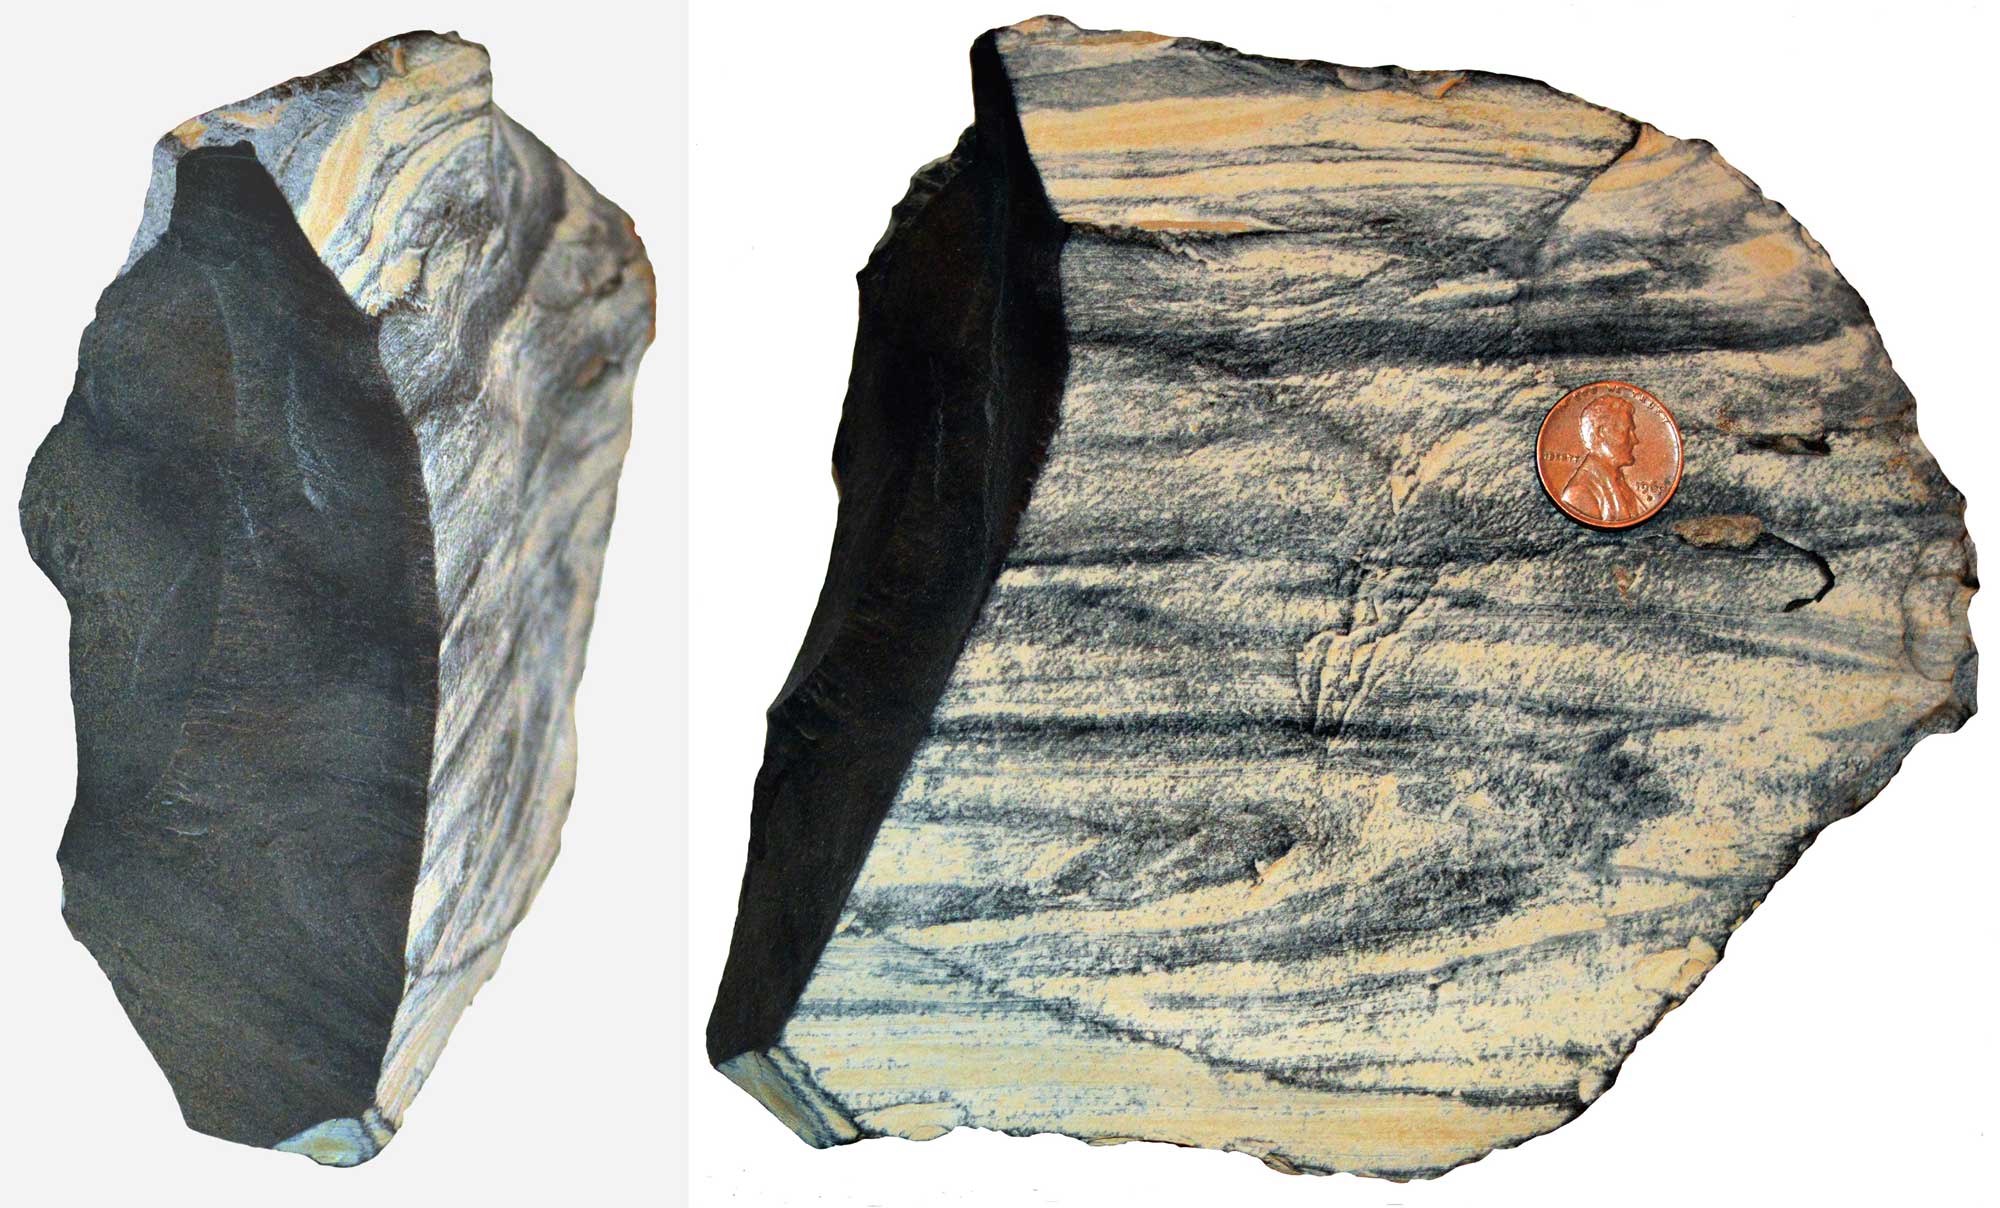 Photo of Green River oil shale in two views. On the left, a piece of shale has been broken, and the broken end is gray in color. On the right, the outside of the shale is beige with swirls of dark gray. A penny is on the shale for scale (the penny is much smaller than the rock).